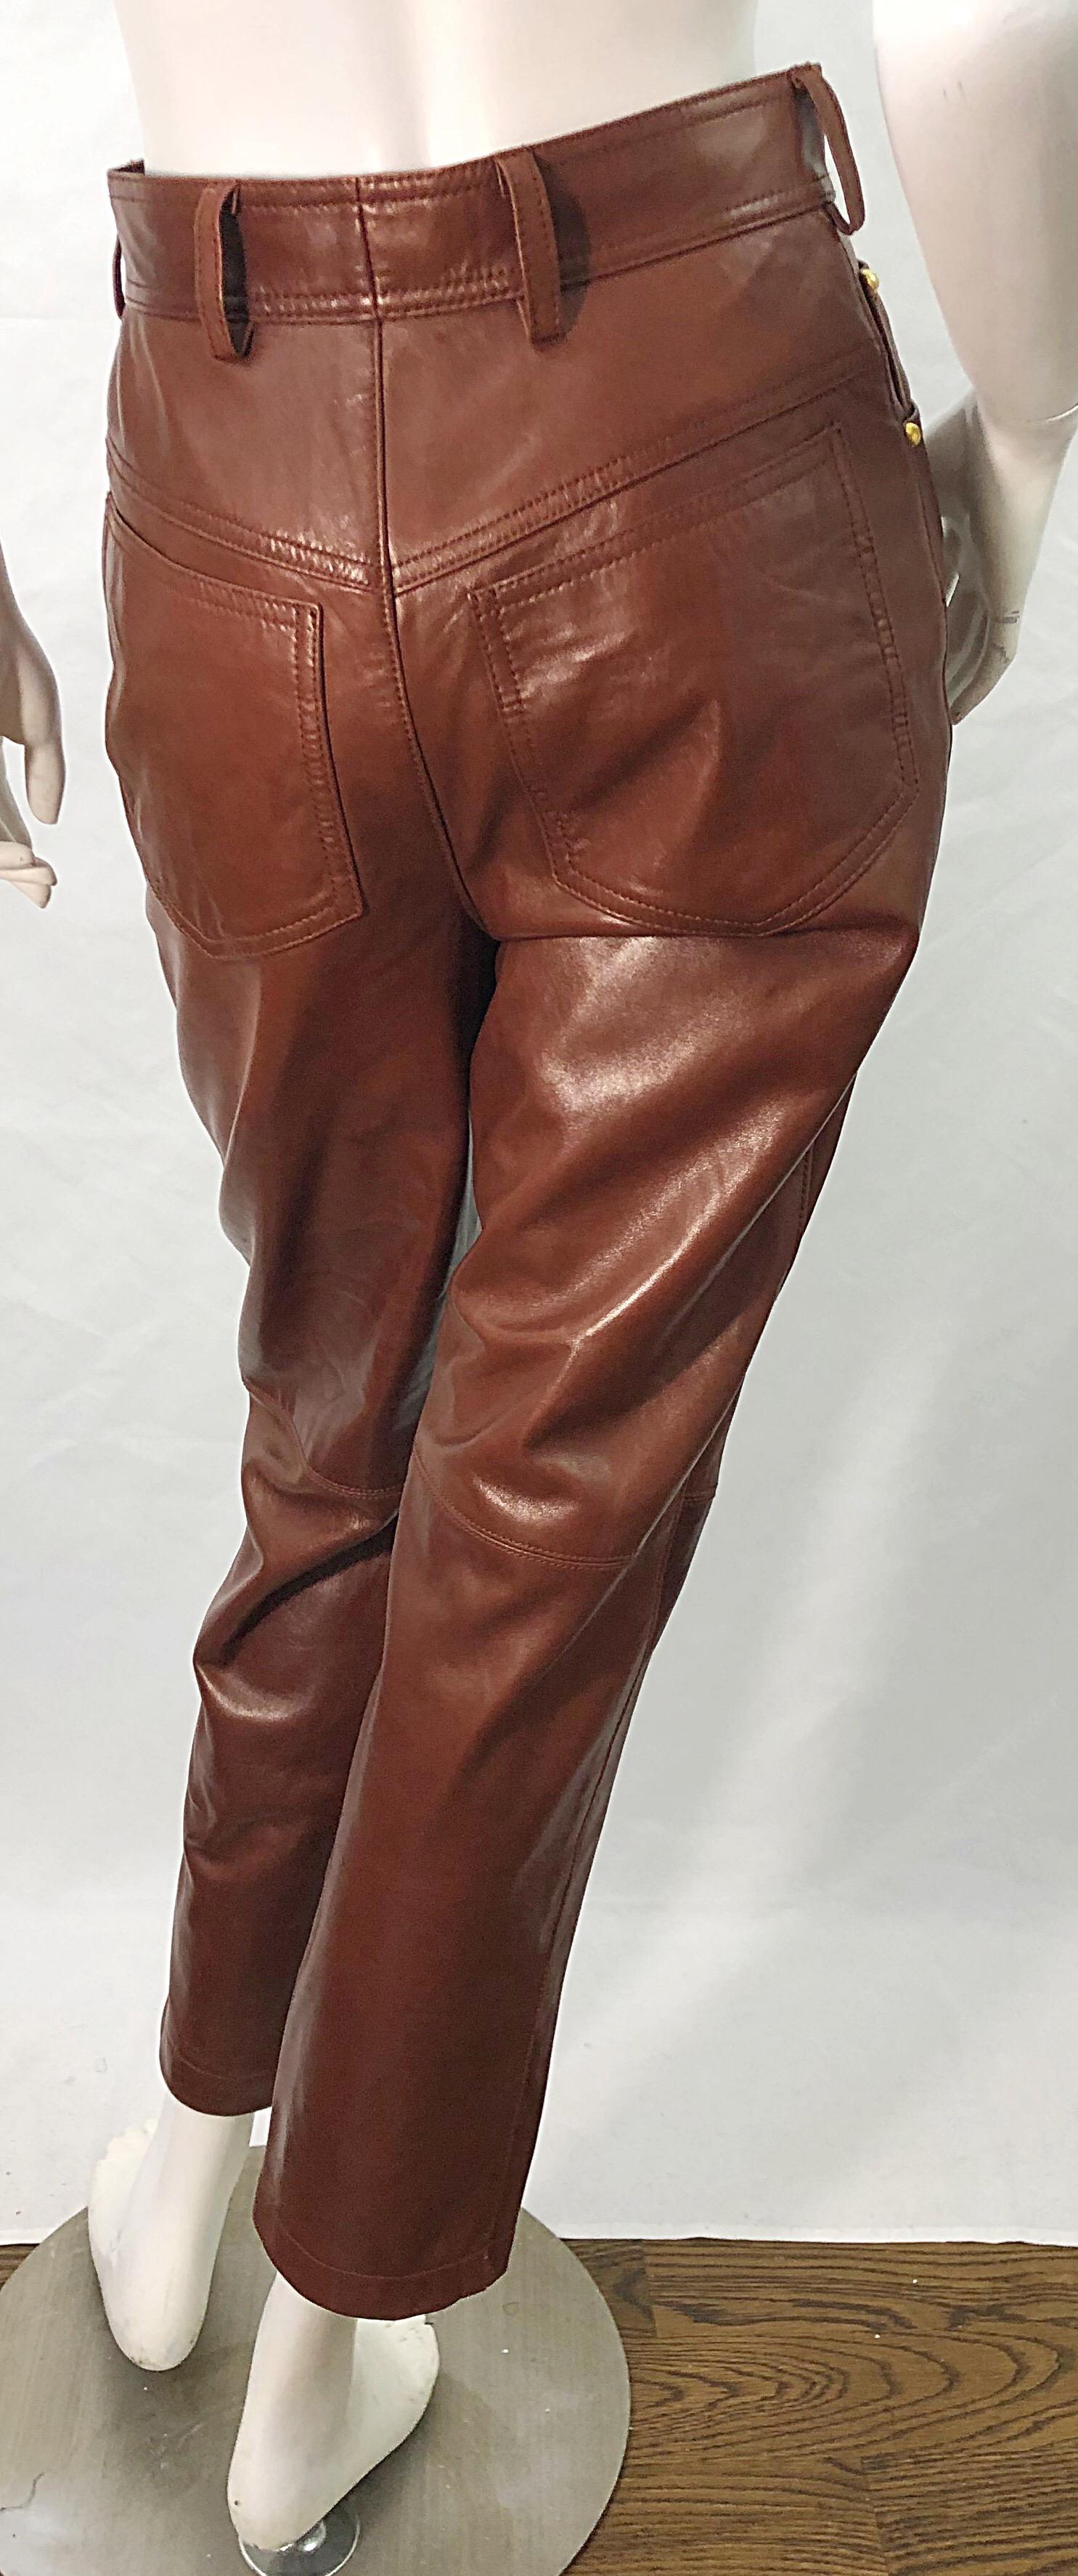 Women's 1990s Escada by Margaretha Ley Size 34 / US 2 Caramel Brown 80s Leather Pants For Sale